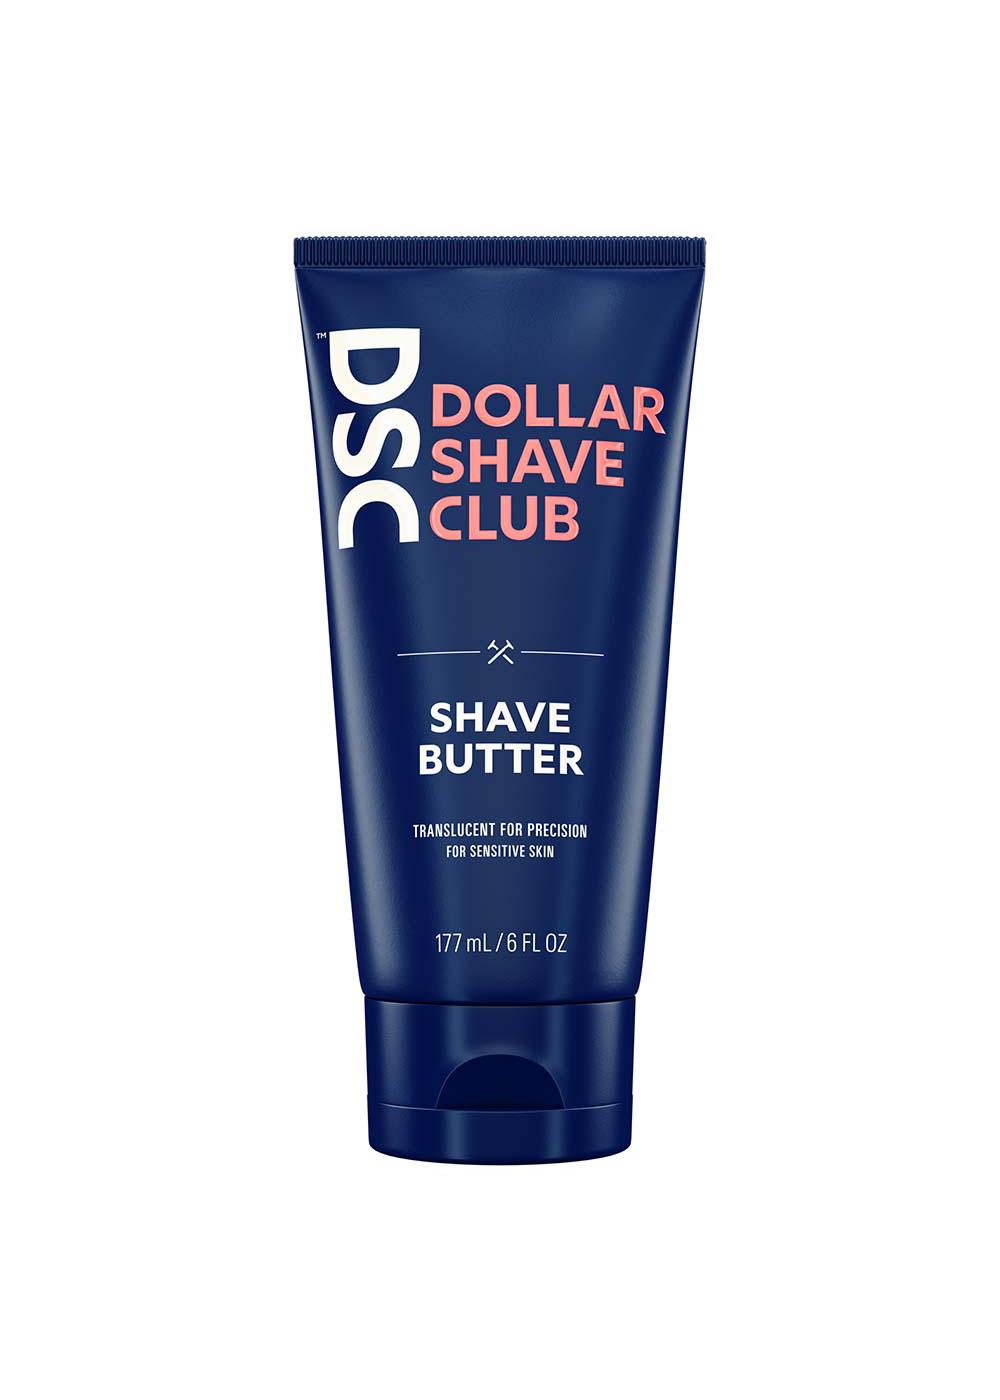 Dollar Shave Club Shave Butter; image 1 of 2